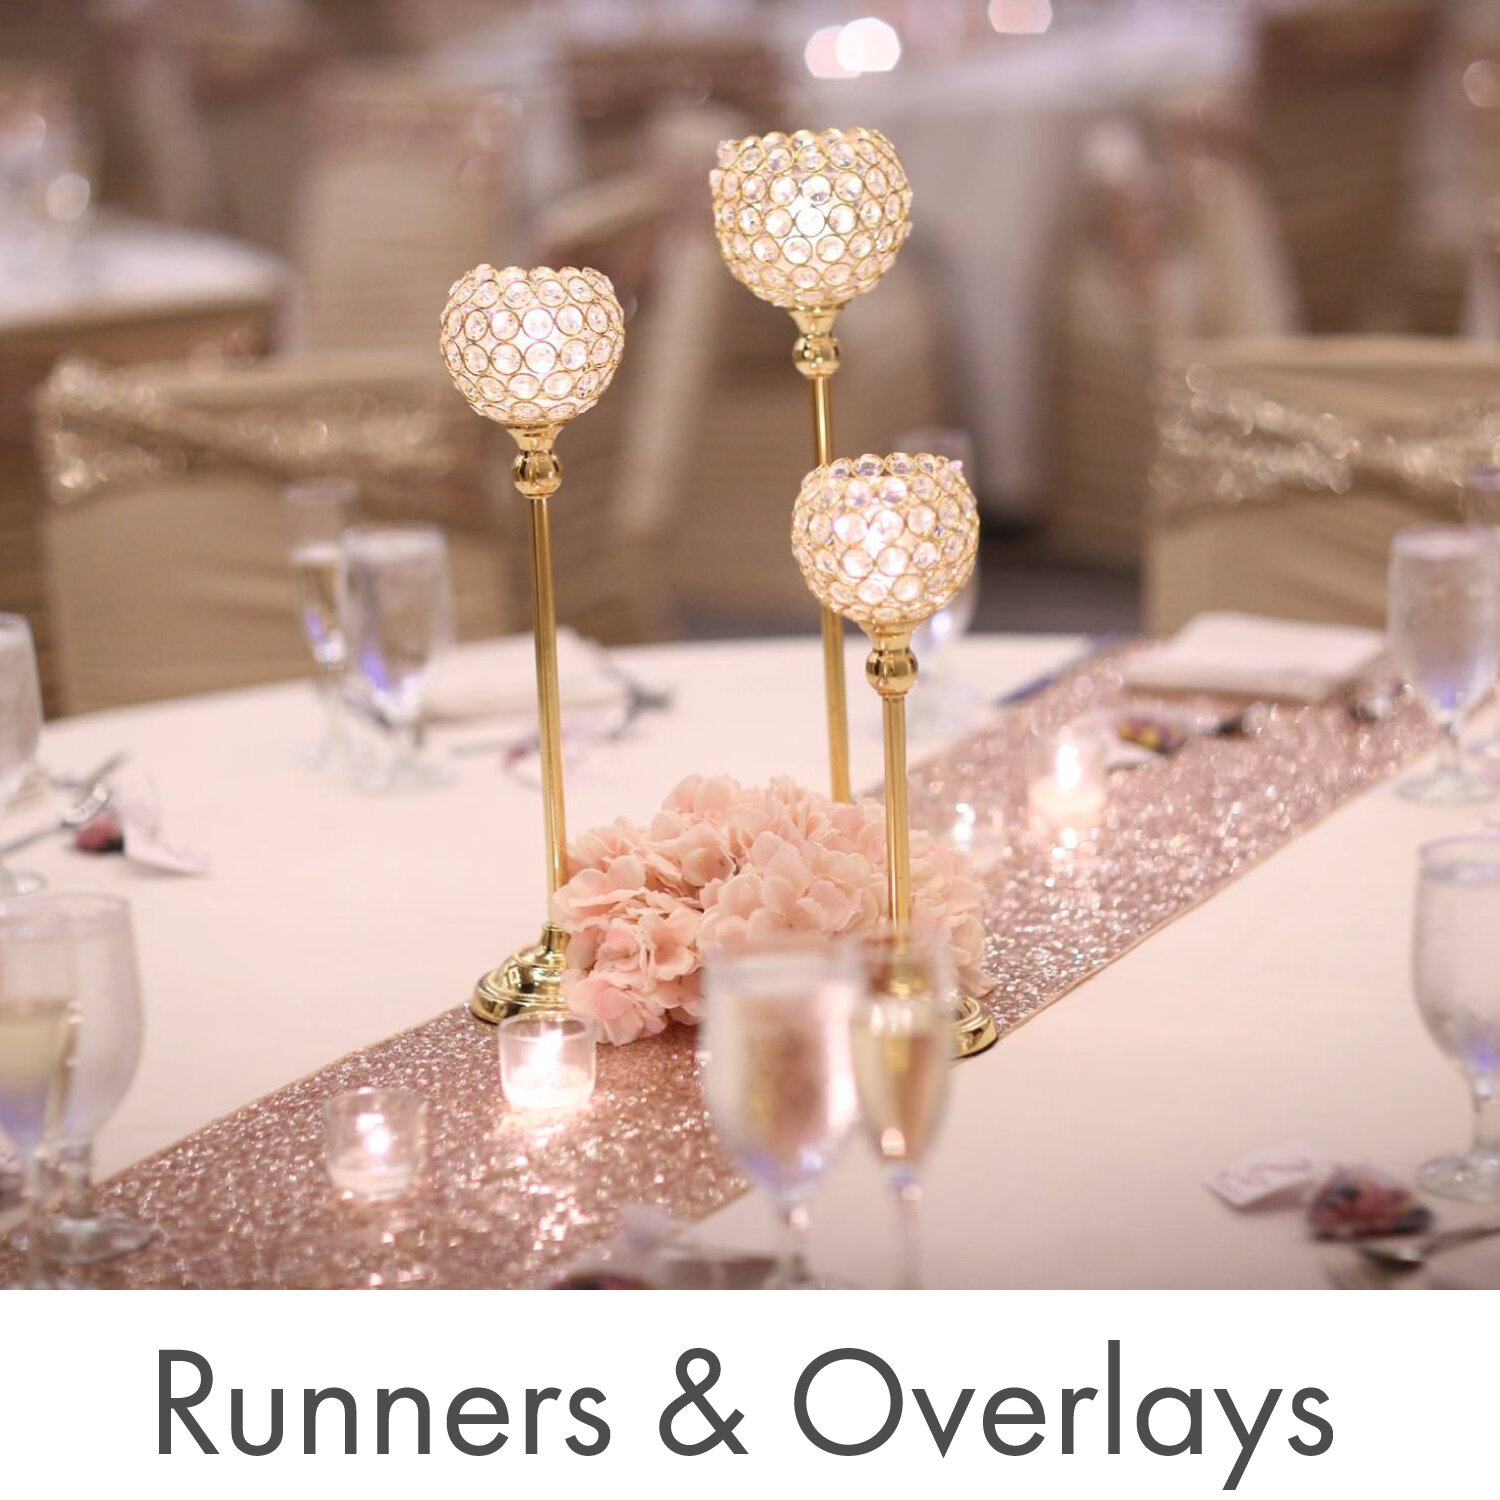 Category-Icons-Runners-Overlays.jpg